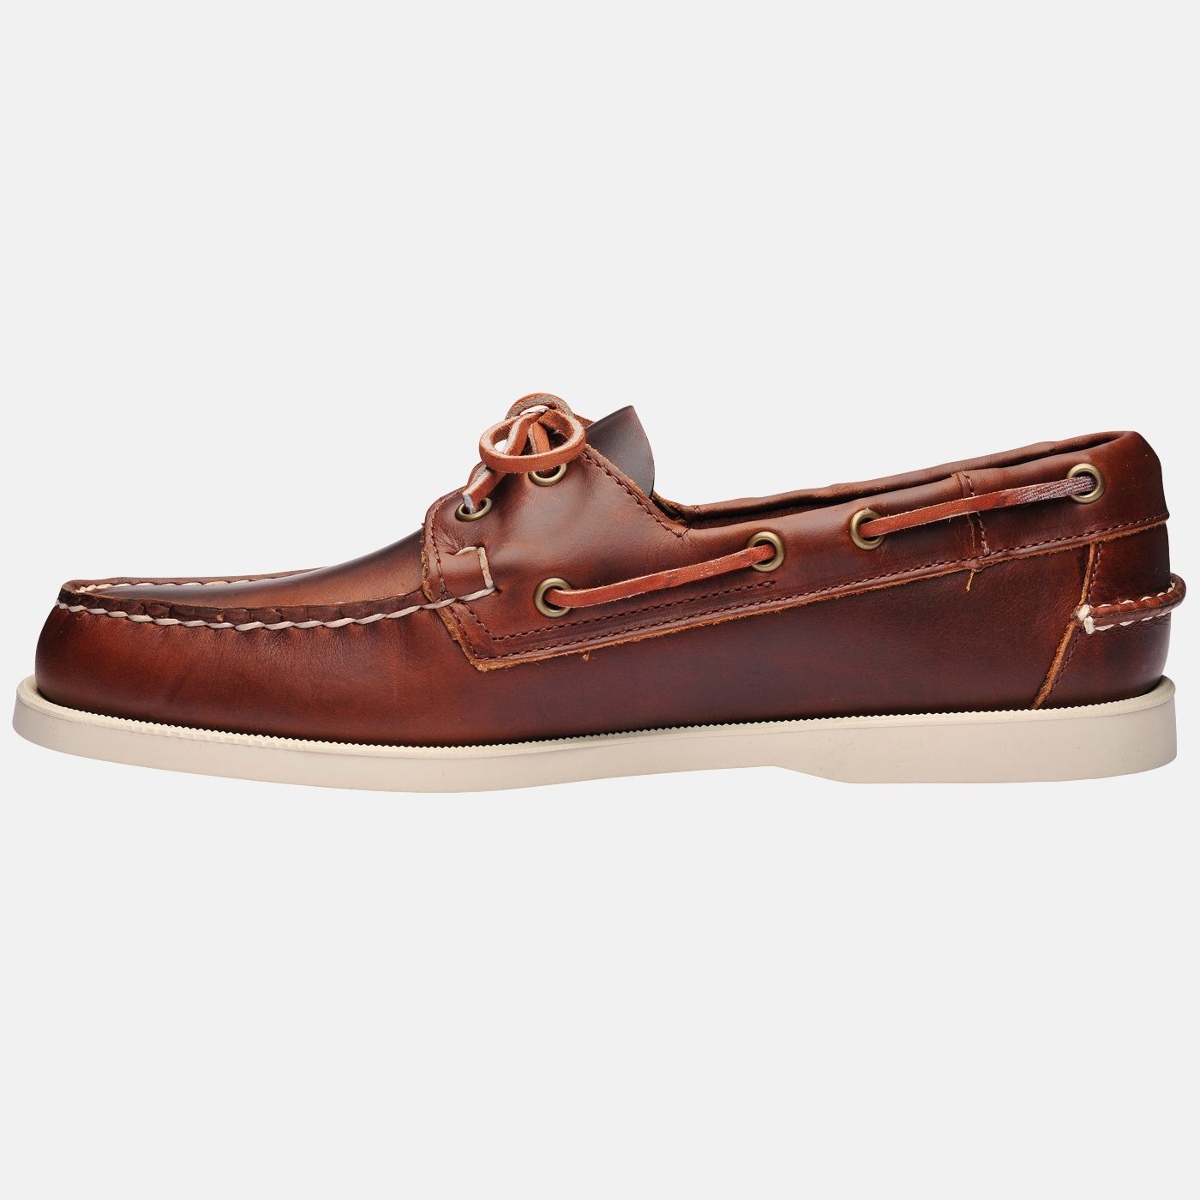 Sebago Docksides chaussures bateau homme brown oiled waxy leather, taille EU 44,5 (US 10,5)